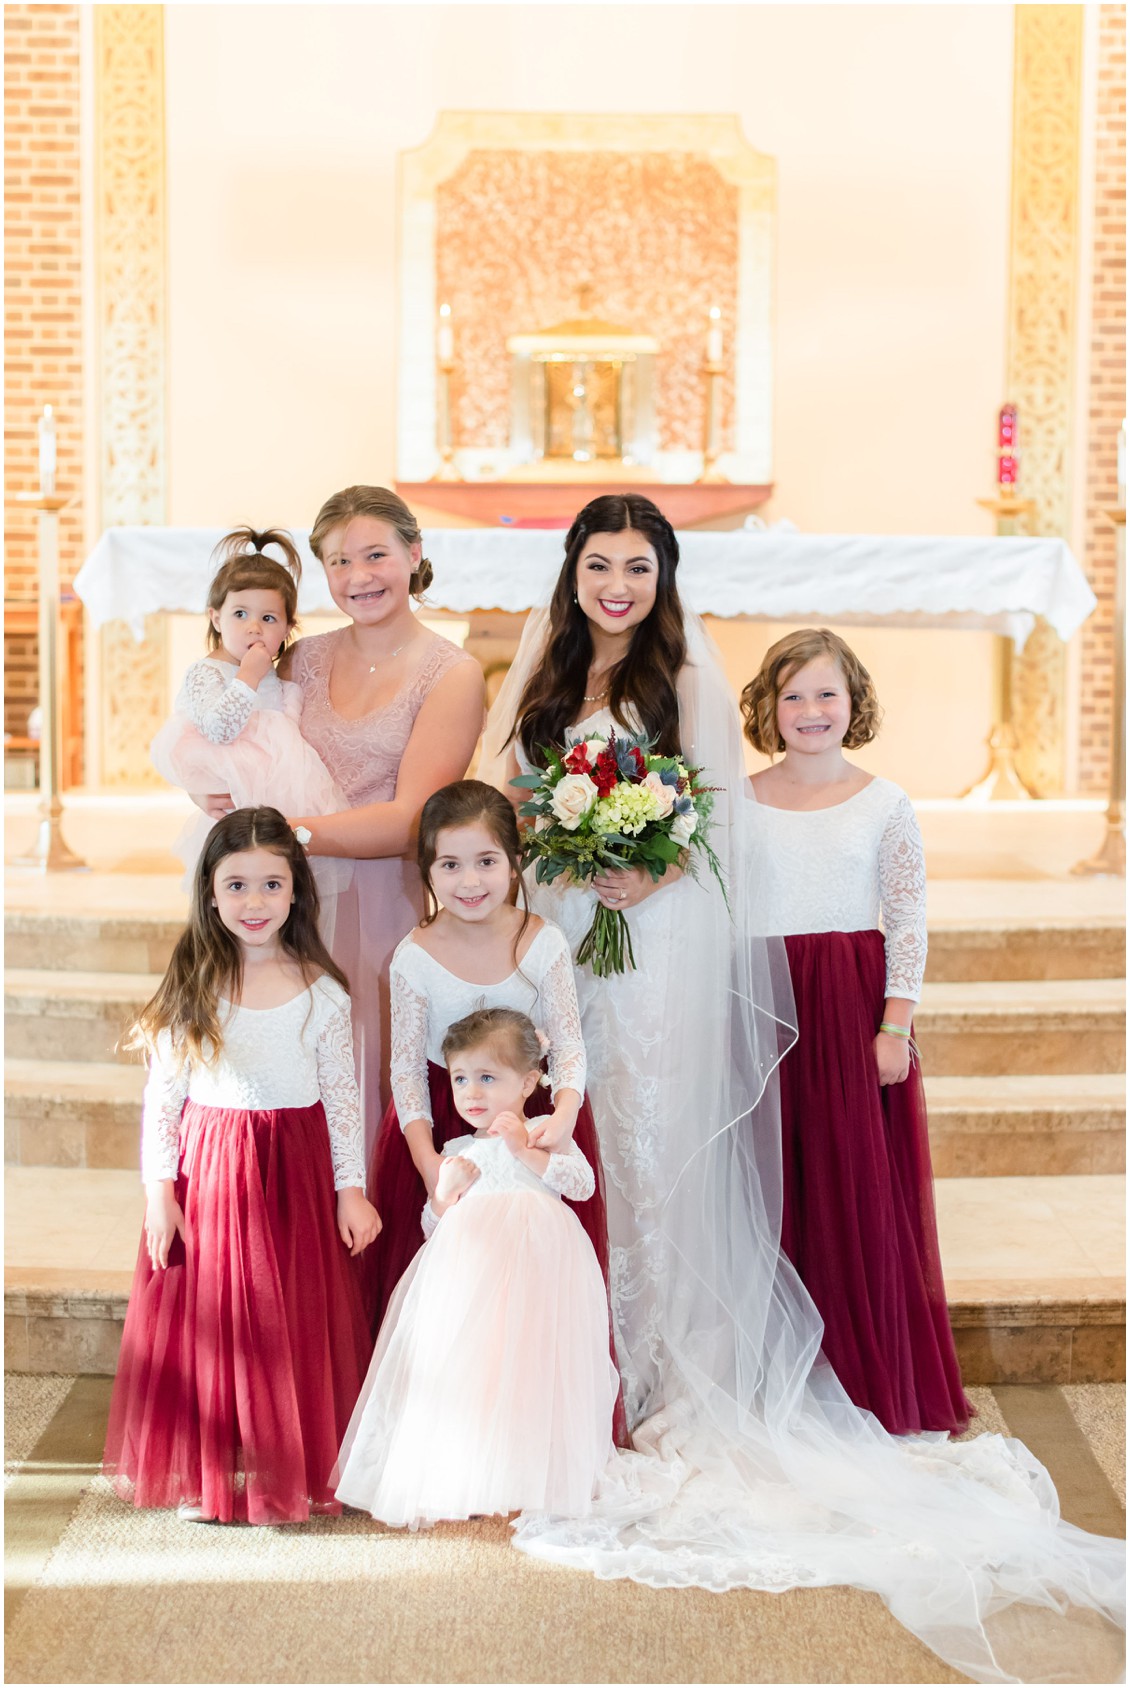 Bride with flower girls portrait in church microwedding | Love will find a way| My Eastern Shore Wedding | Alexandra Kent Photography